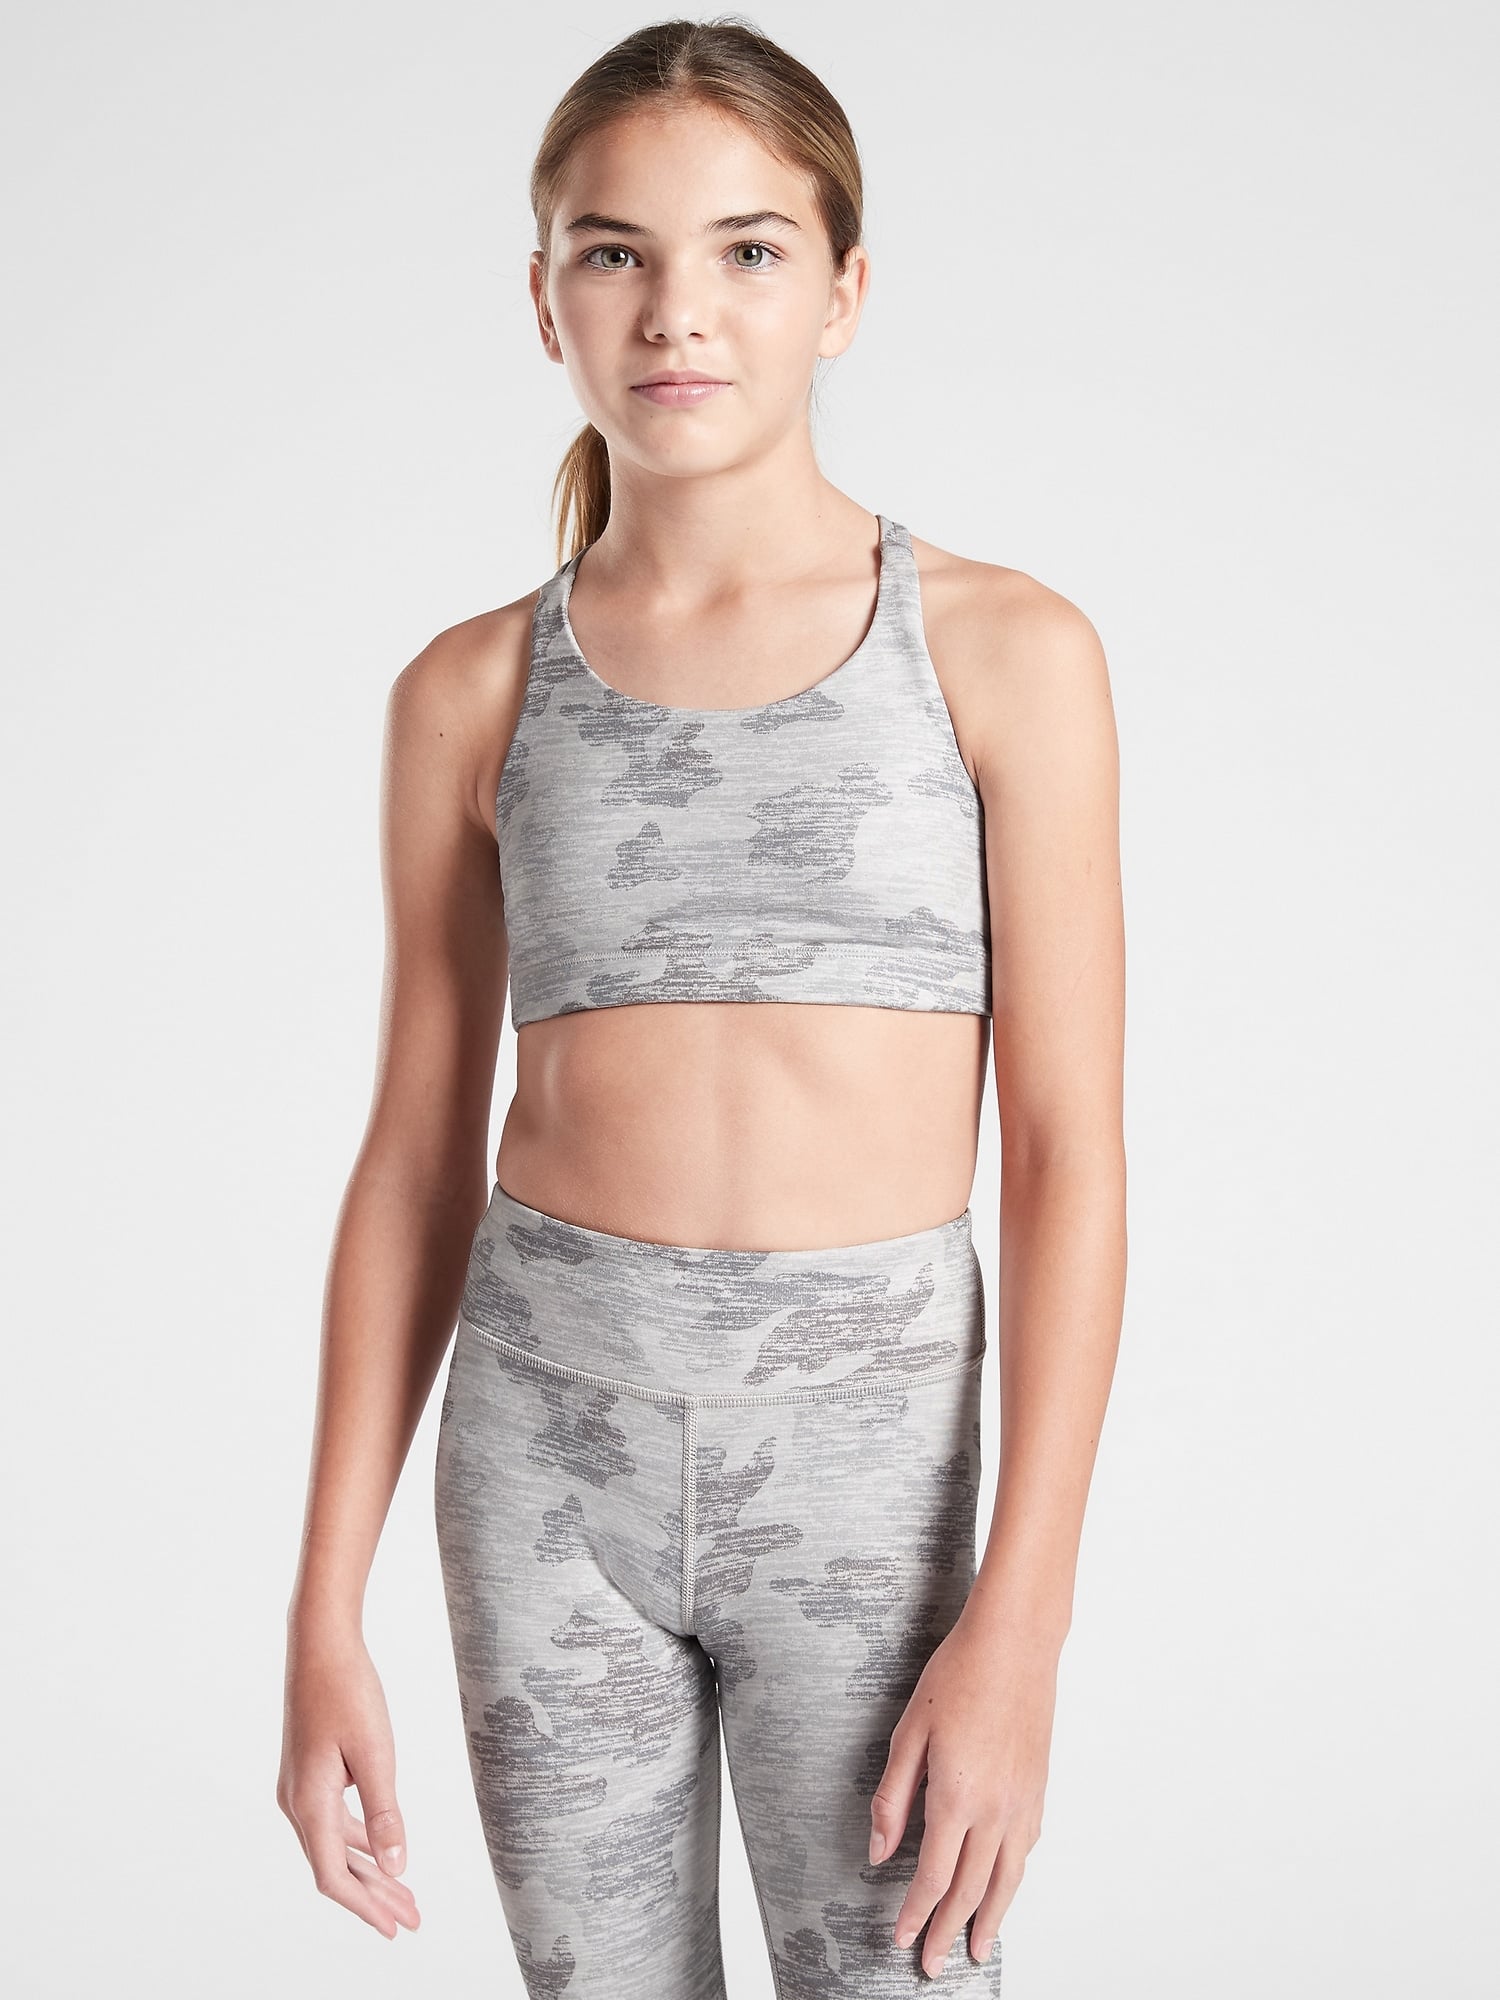 Athleta Girl Printed Upbeat Bra 2.0, Gym Class Hero! This Brand Has the  Best Mother-Daughter Fitness Sets